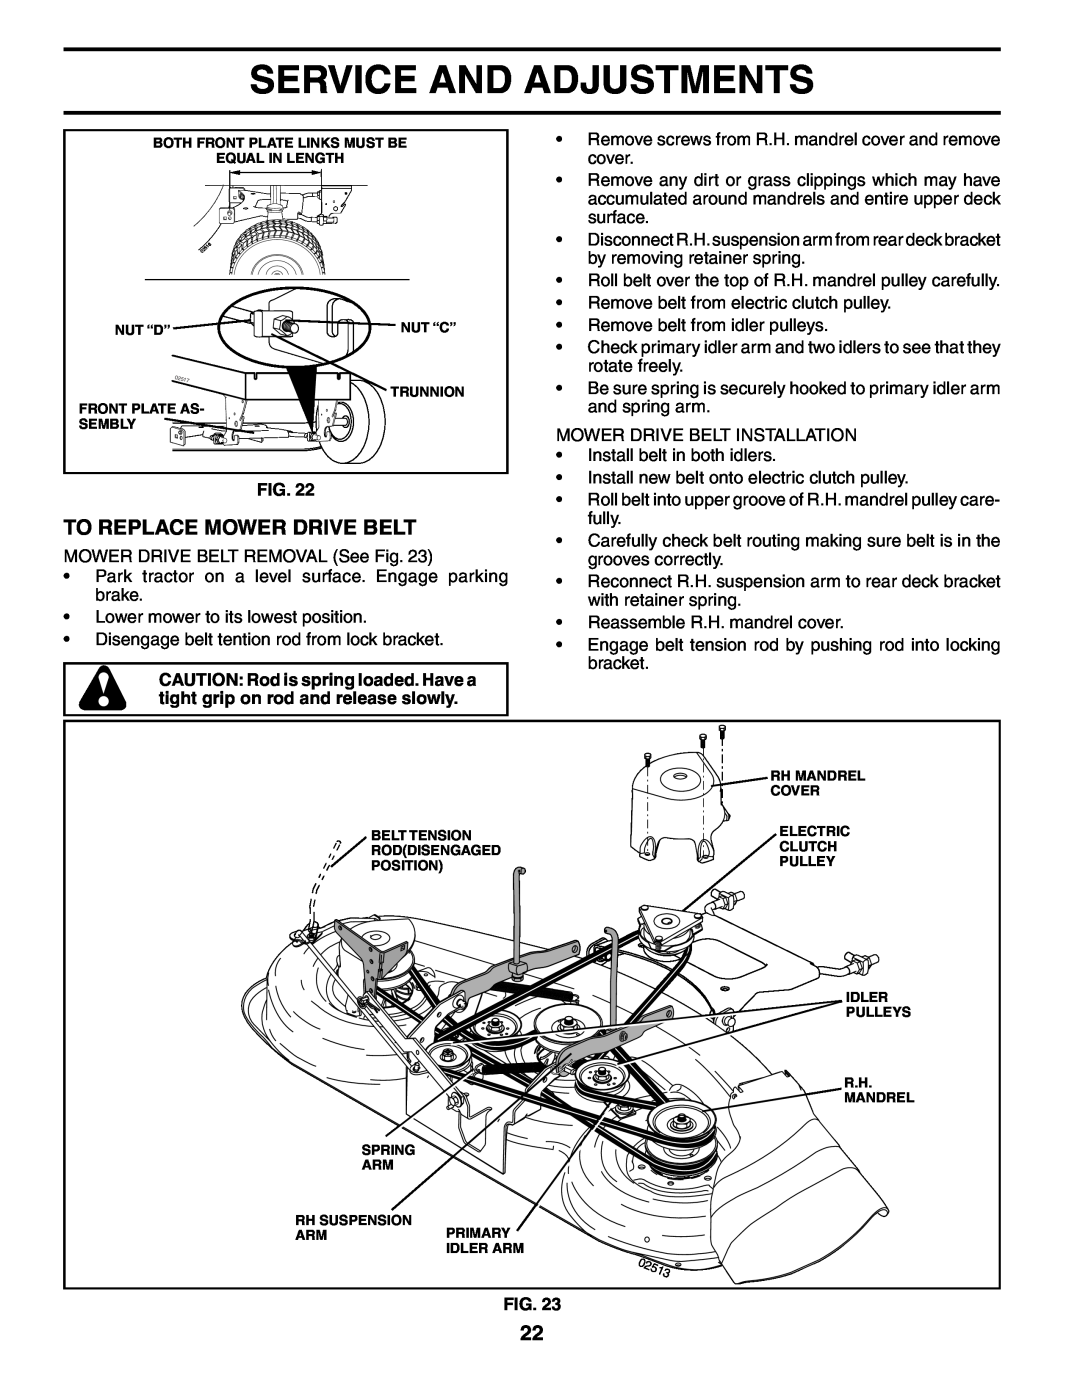 Poulan DB24H48YT manual To Replace Mower Drive Belt, Service And Adjustments, Nut “C” 